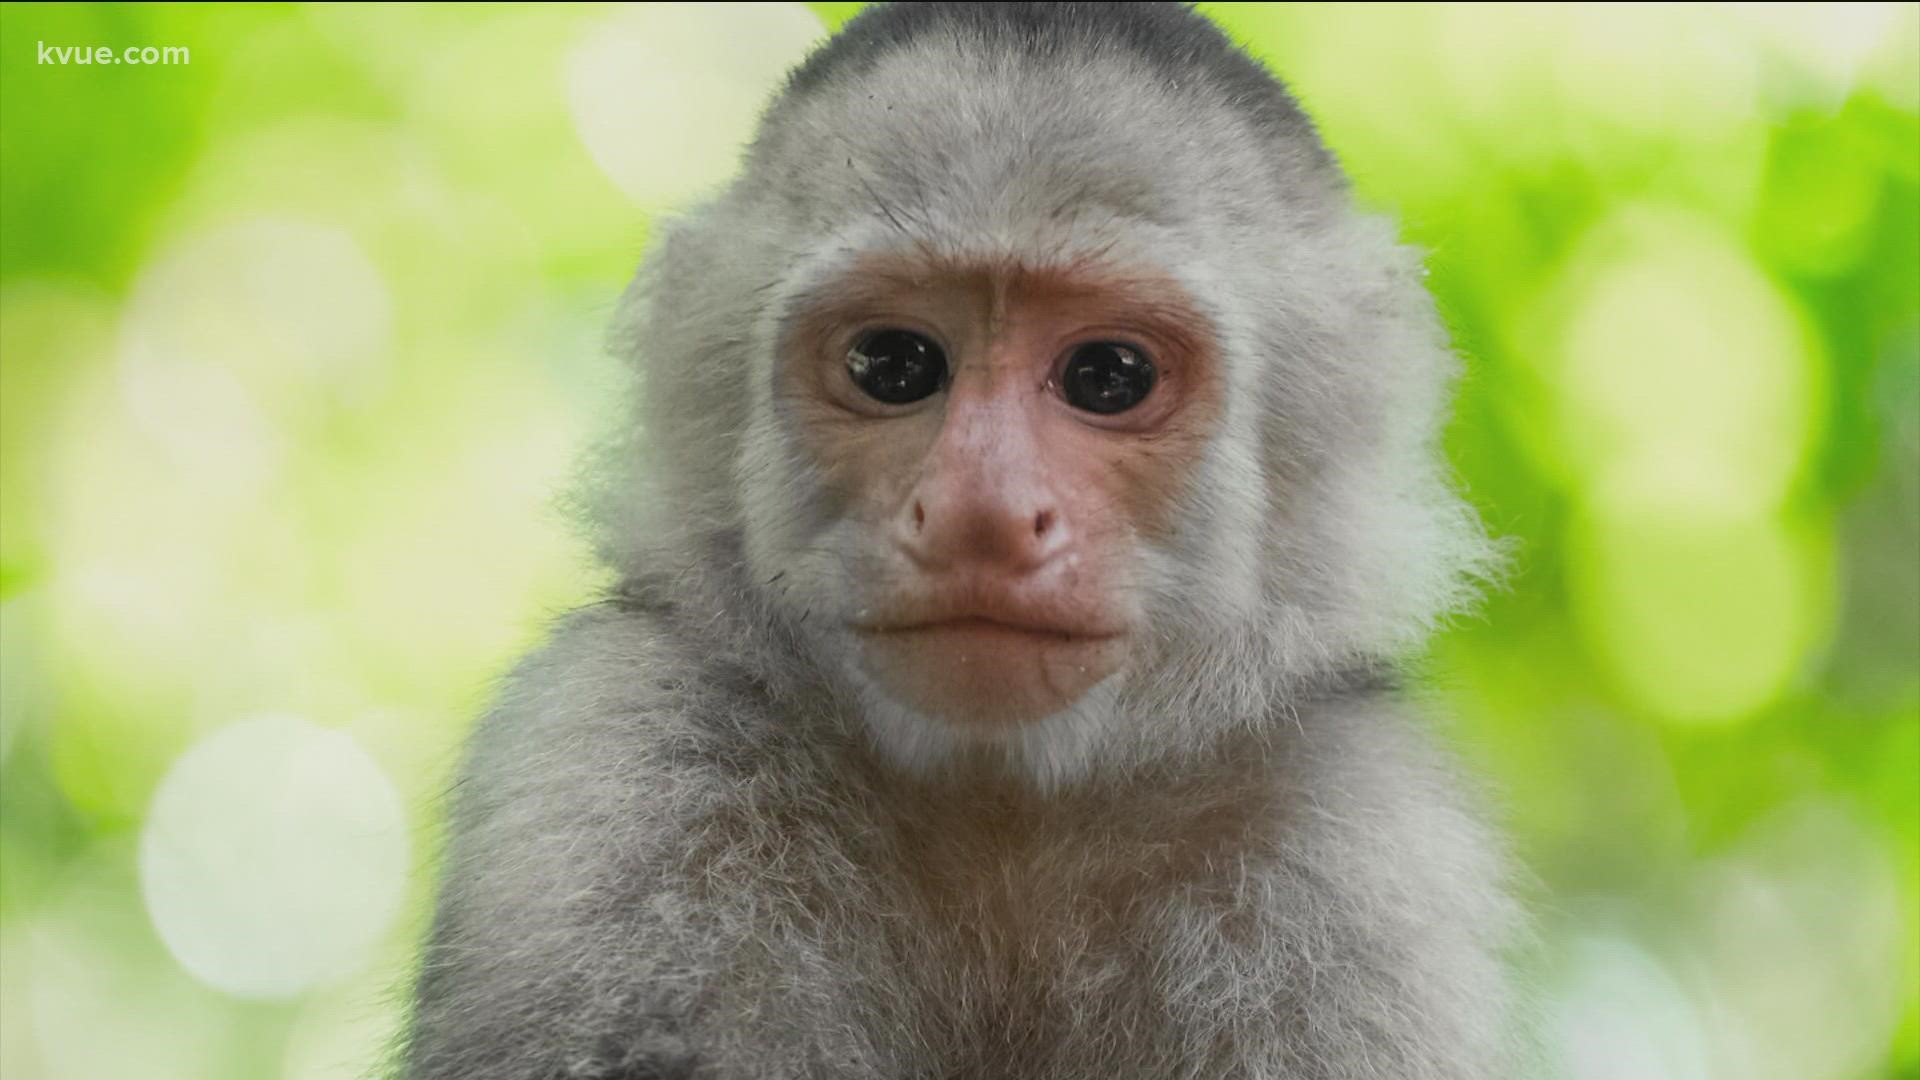 The group claims researchers used an unapproved substance called "Bioglue" that killed monkeys by destroying parts of their brains.